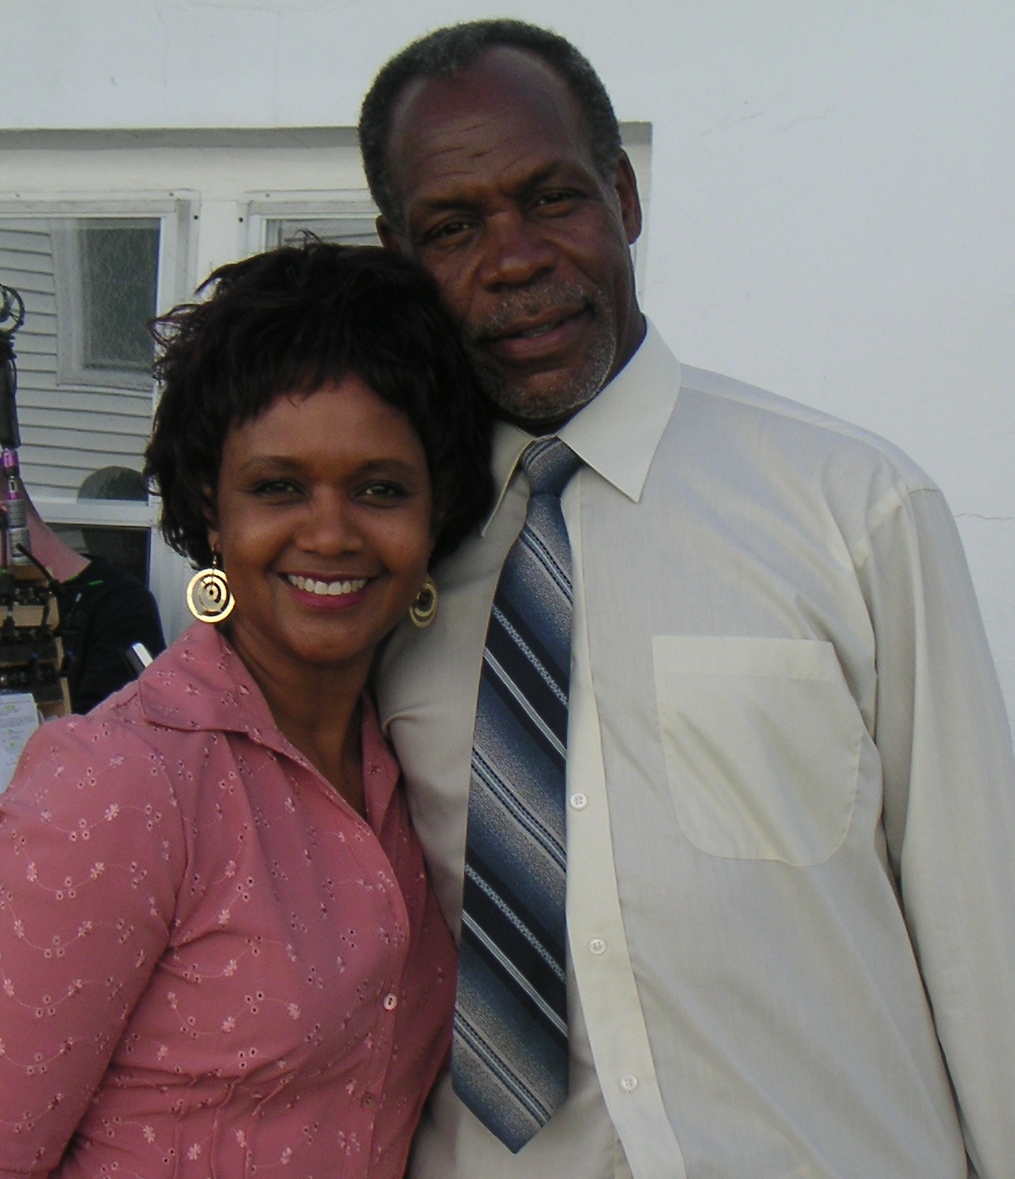 Tonya Williams and Danny Glover on the set of the film Poor Boys Game